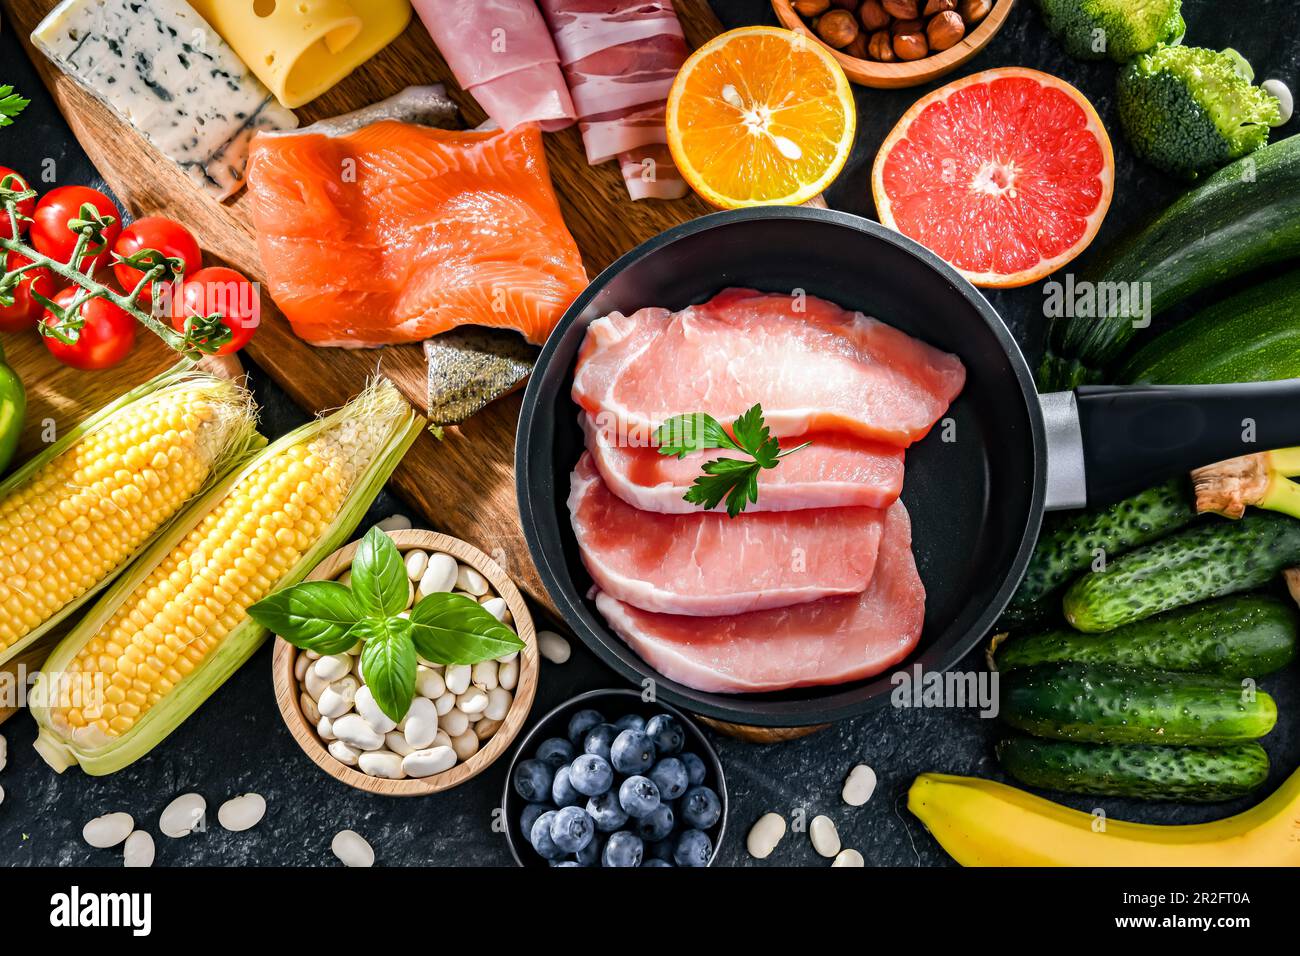 Low-carbohydrate diet products recommended for weight loss Stock Photo